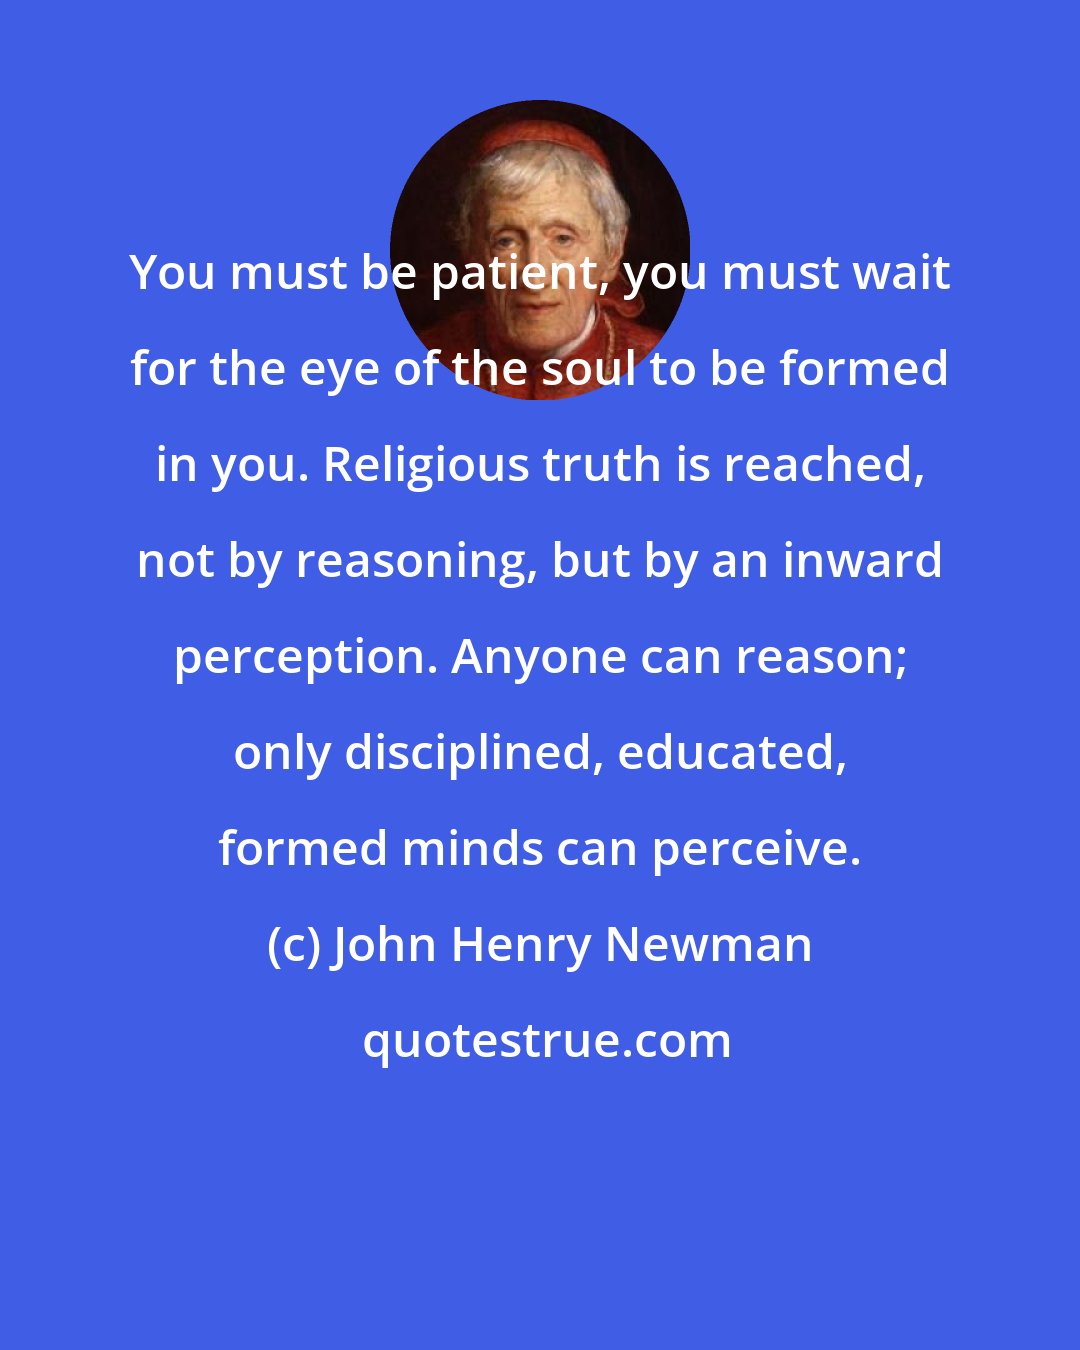 John Henry Newman: You must be patient, you must wait for the eye of the soul to be formed in you. Religious truth is reached, not by reasoning, but by an inward perception. Anyone can reason; only disciplined, educated, formed minds can perceive.